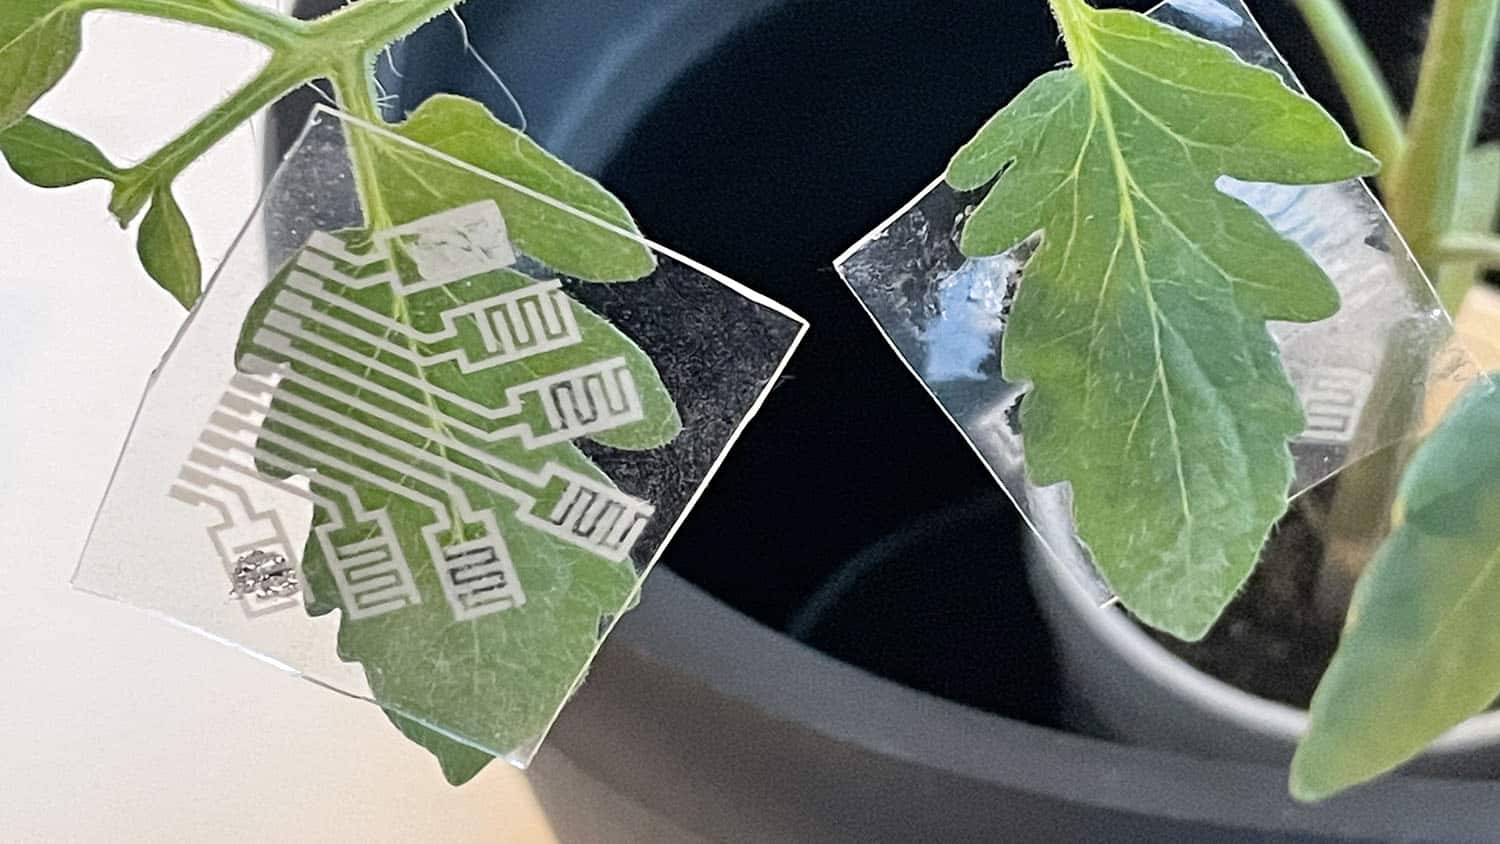 Image shows an electronic patch attached to the leaf of a tomato plant.